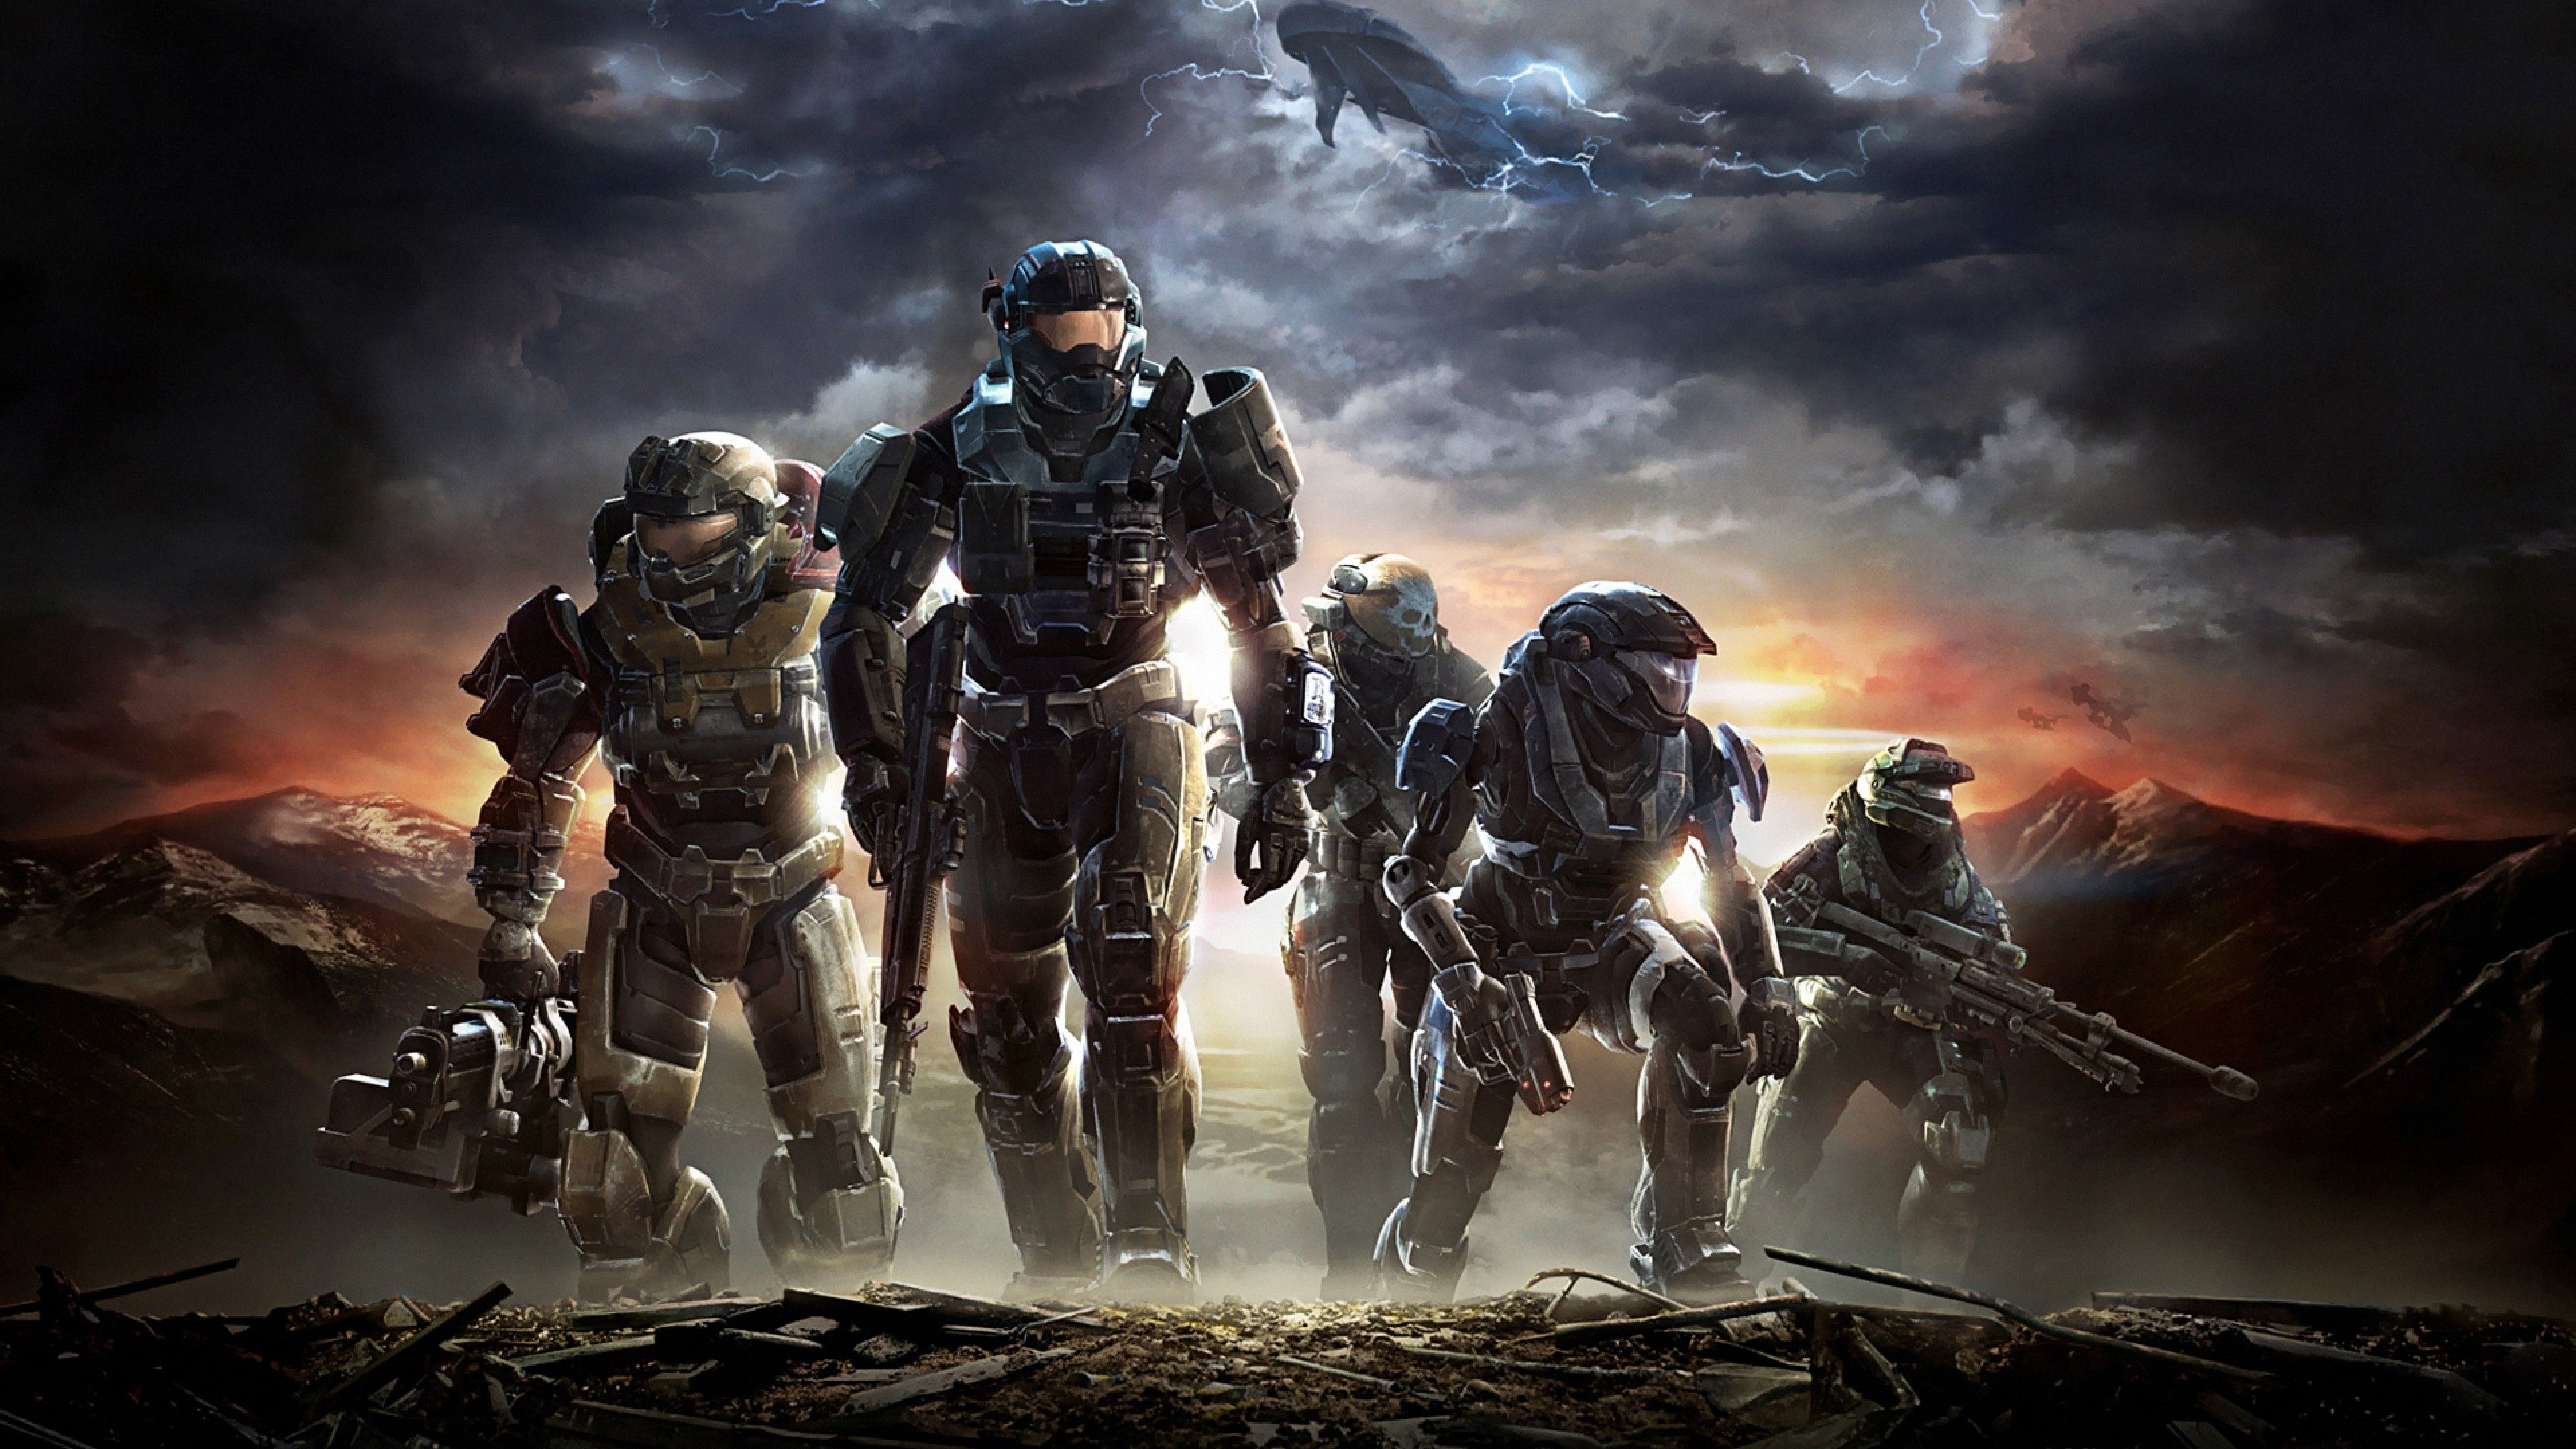 Halo Wallpapers HD Free download 